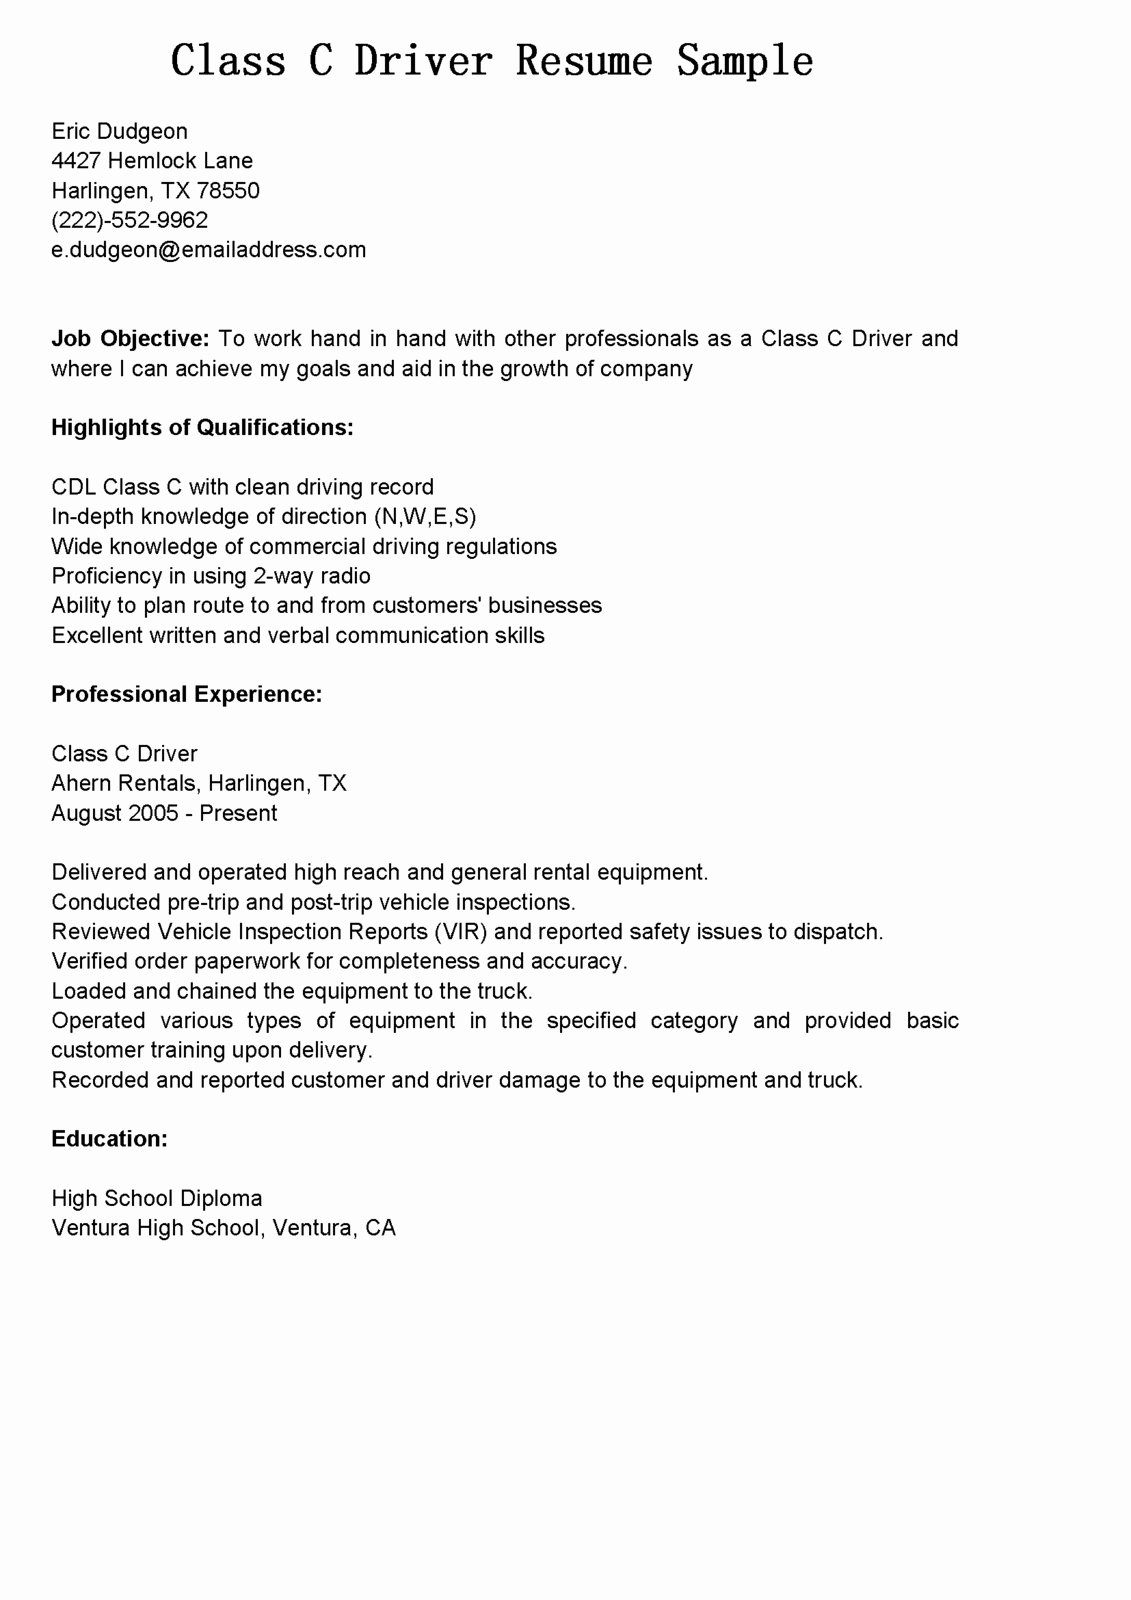 Driver Resumes Class C Driver Resume Sample